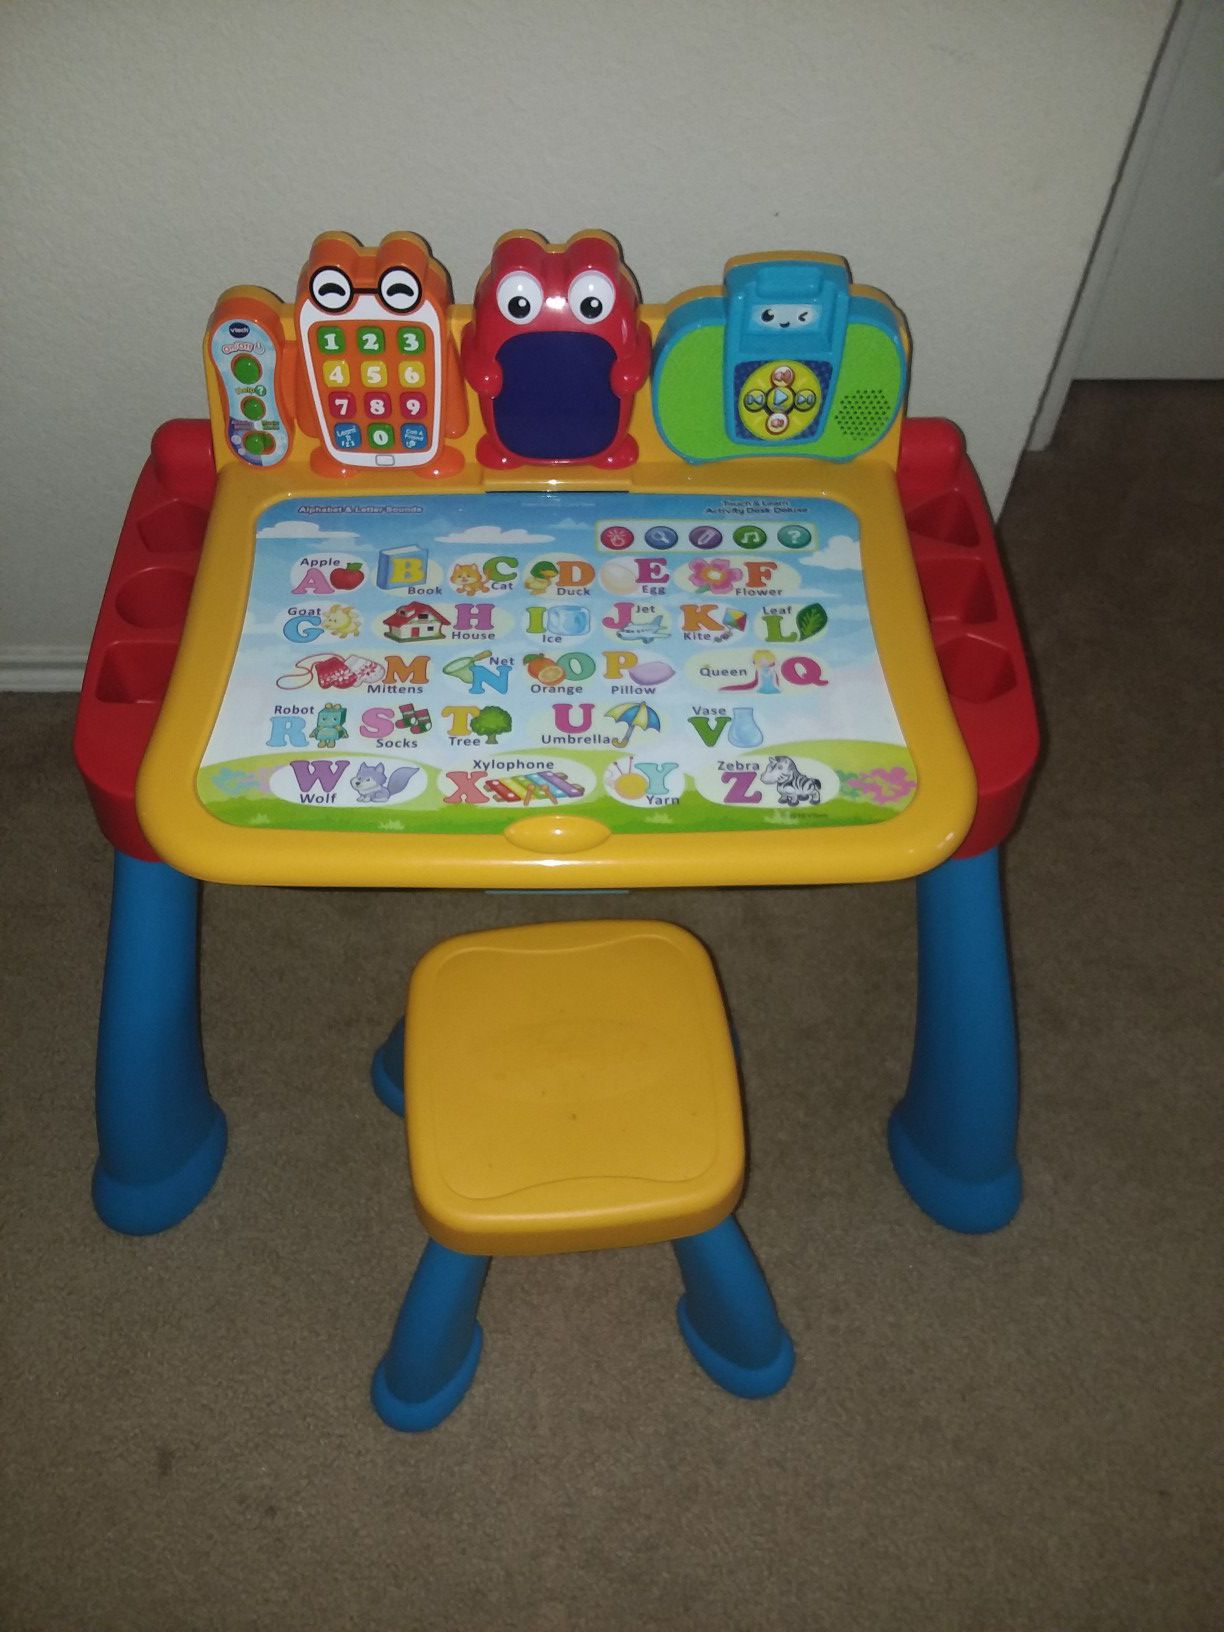 Vtech Touch and Learn Activity Desk Deluxe w/ 5 expansion packs